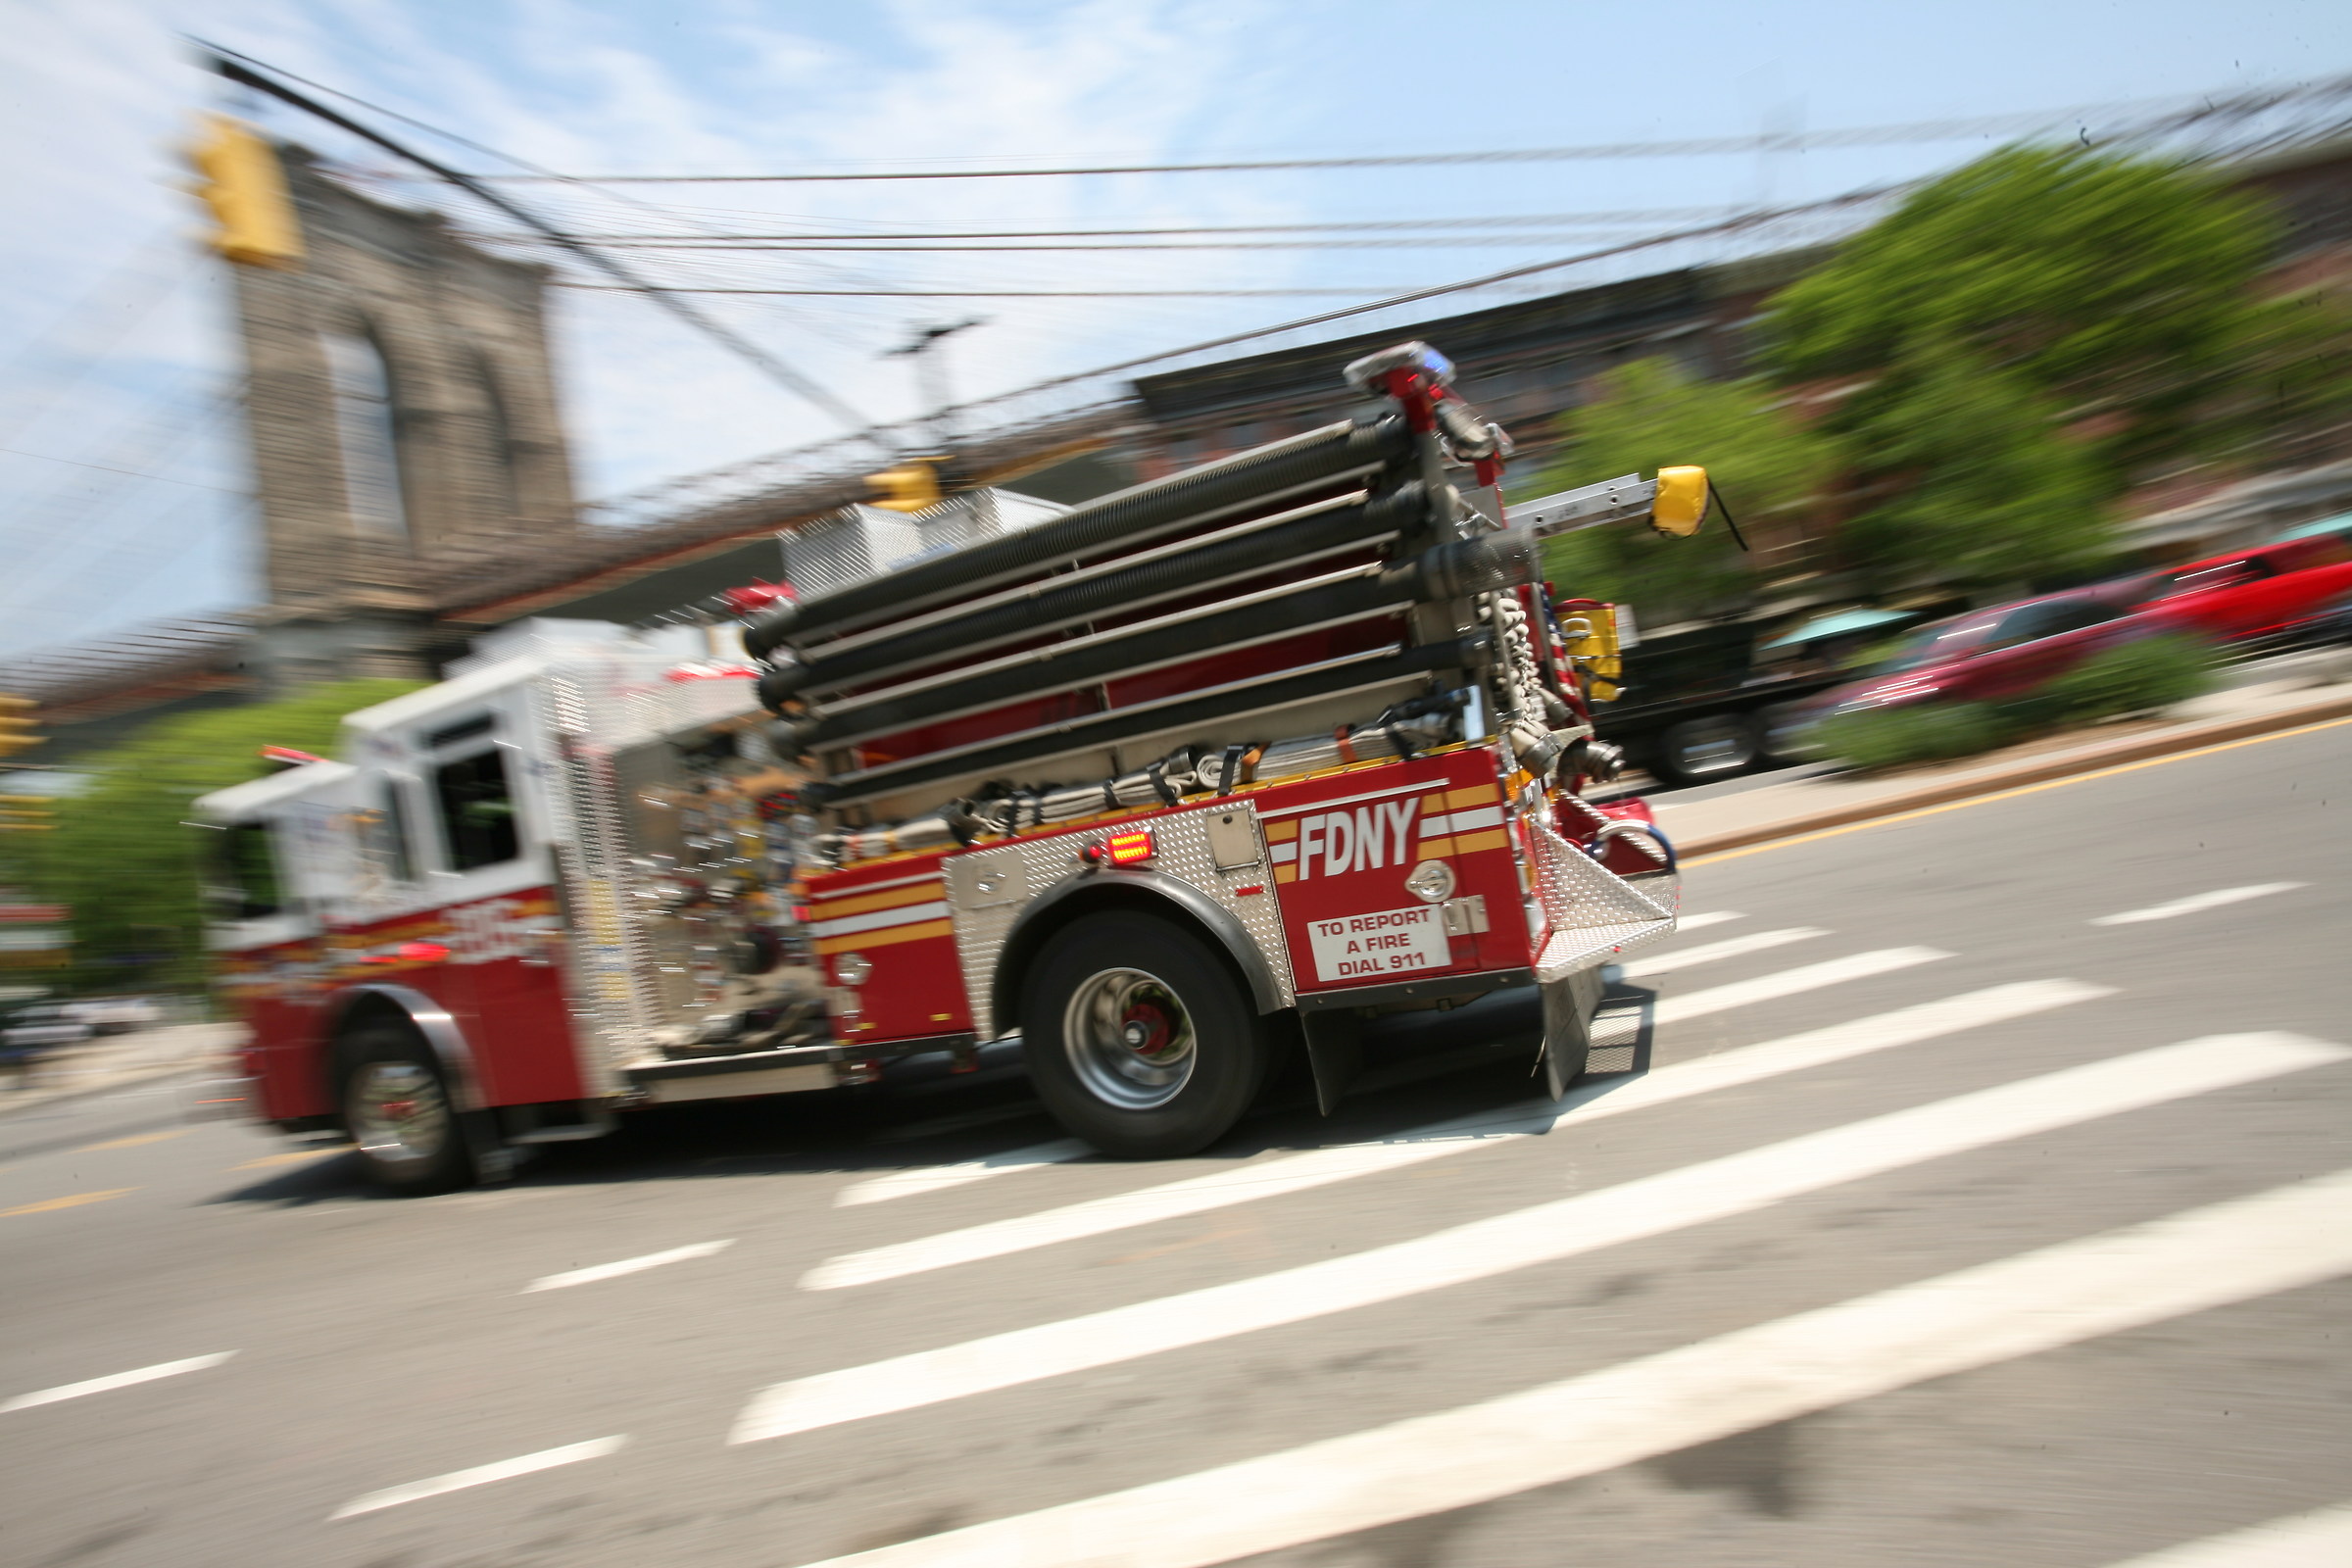 New York firefighters...